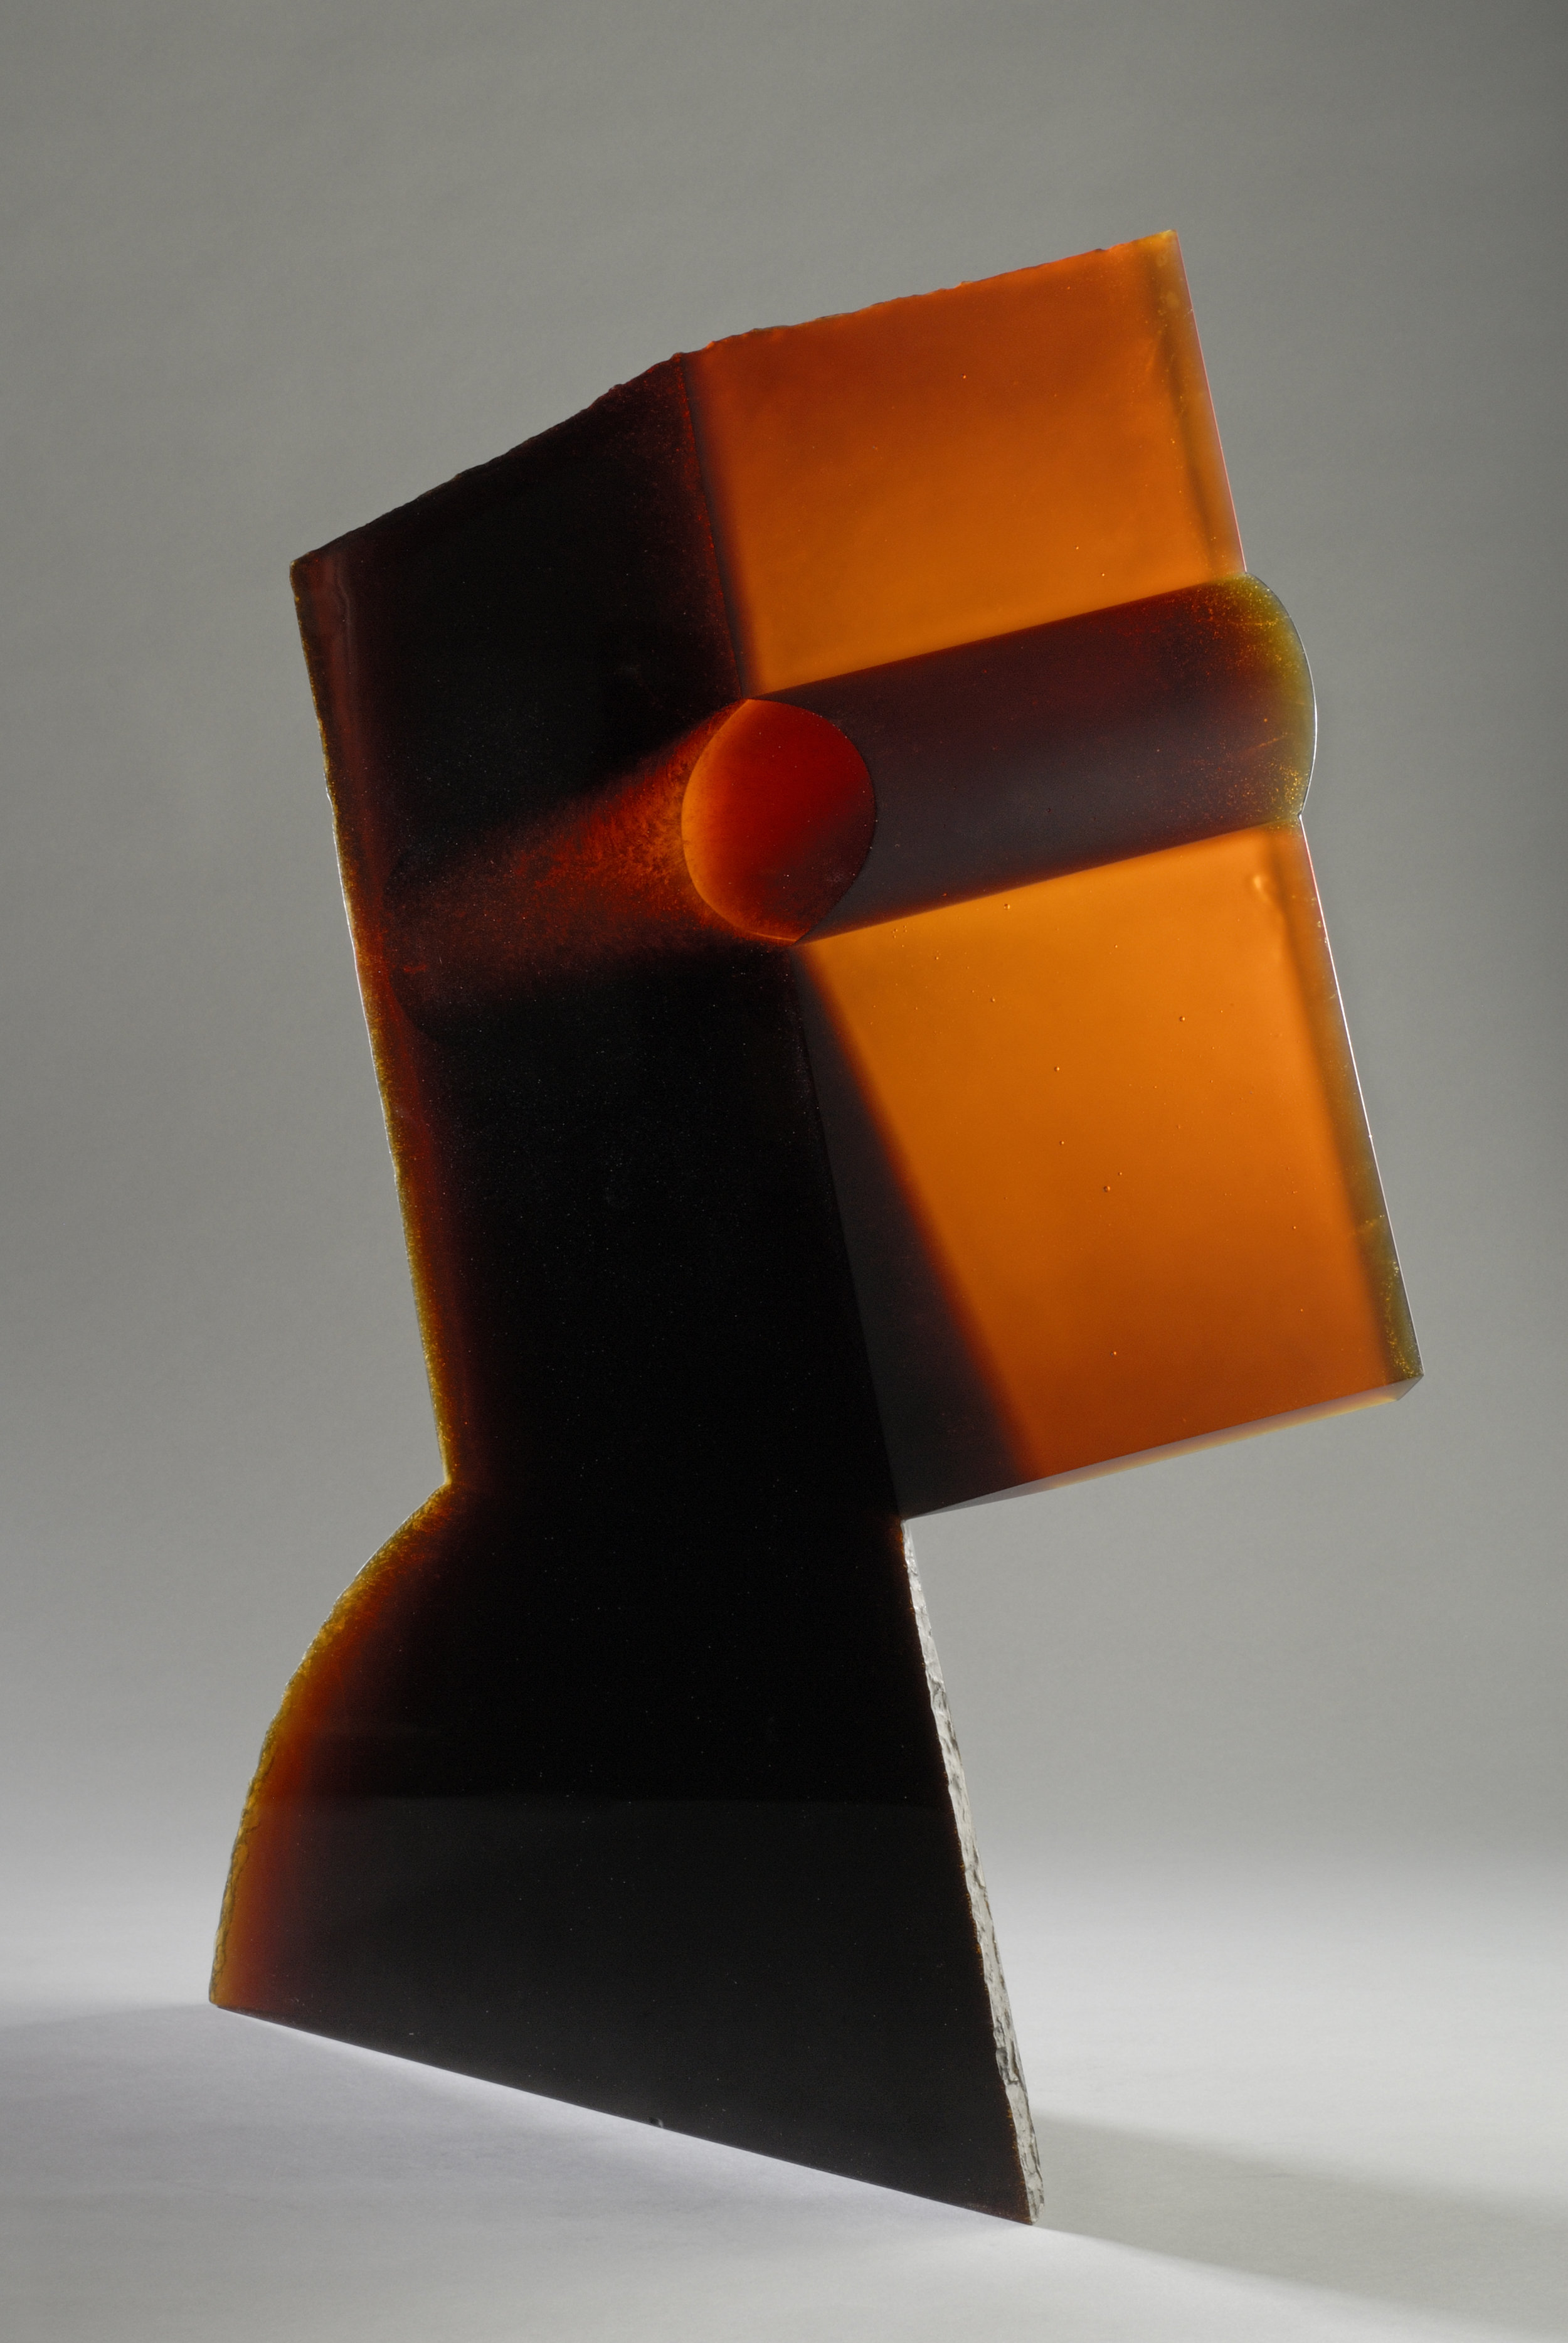  Jaroslava Brychtová (Czech, born 1924) and Stanislav Libenský (Czech, 1921 - 2002).&nbsp; The Second Queen,  1991-1992.&nbsp;Mold-melted glass, cut and ground;&nbsp;32 1/8 x 25 1/2 in. Collection of Museum of Glass, Tacoma, Washington, gift of Lisa 